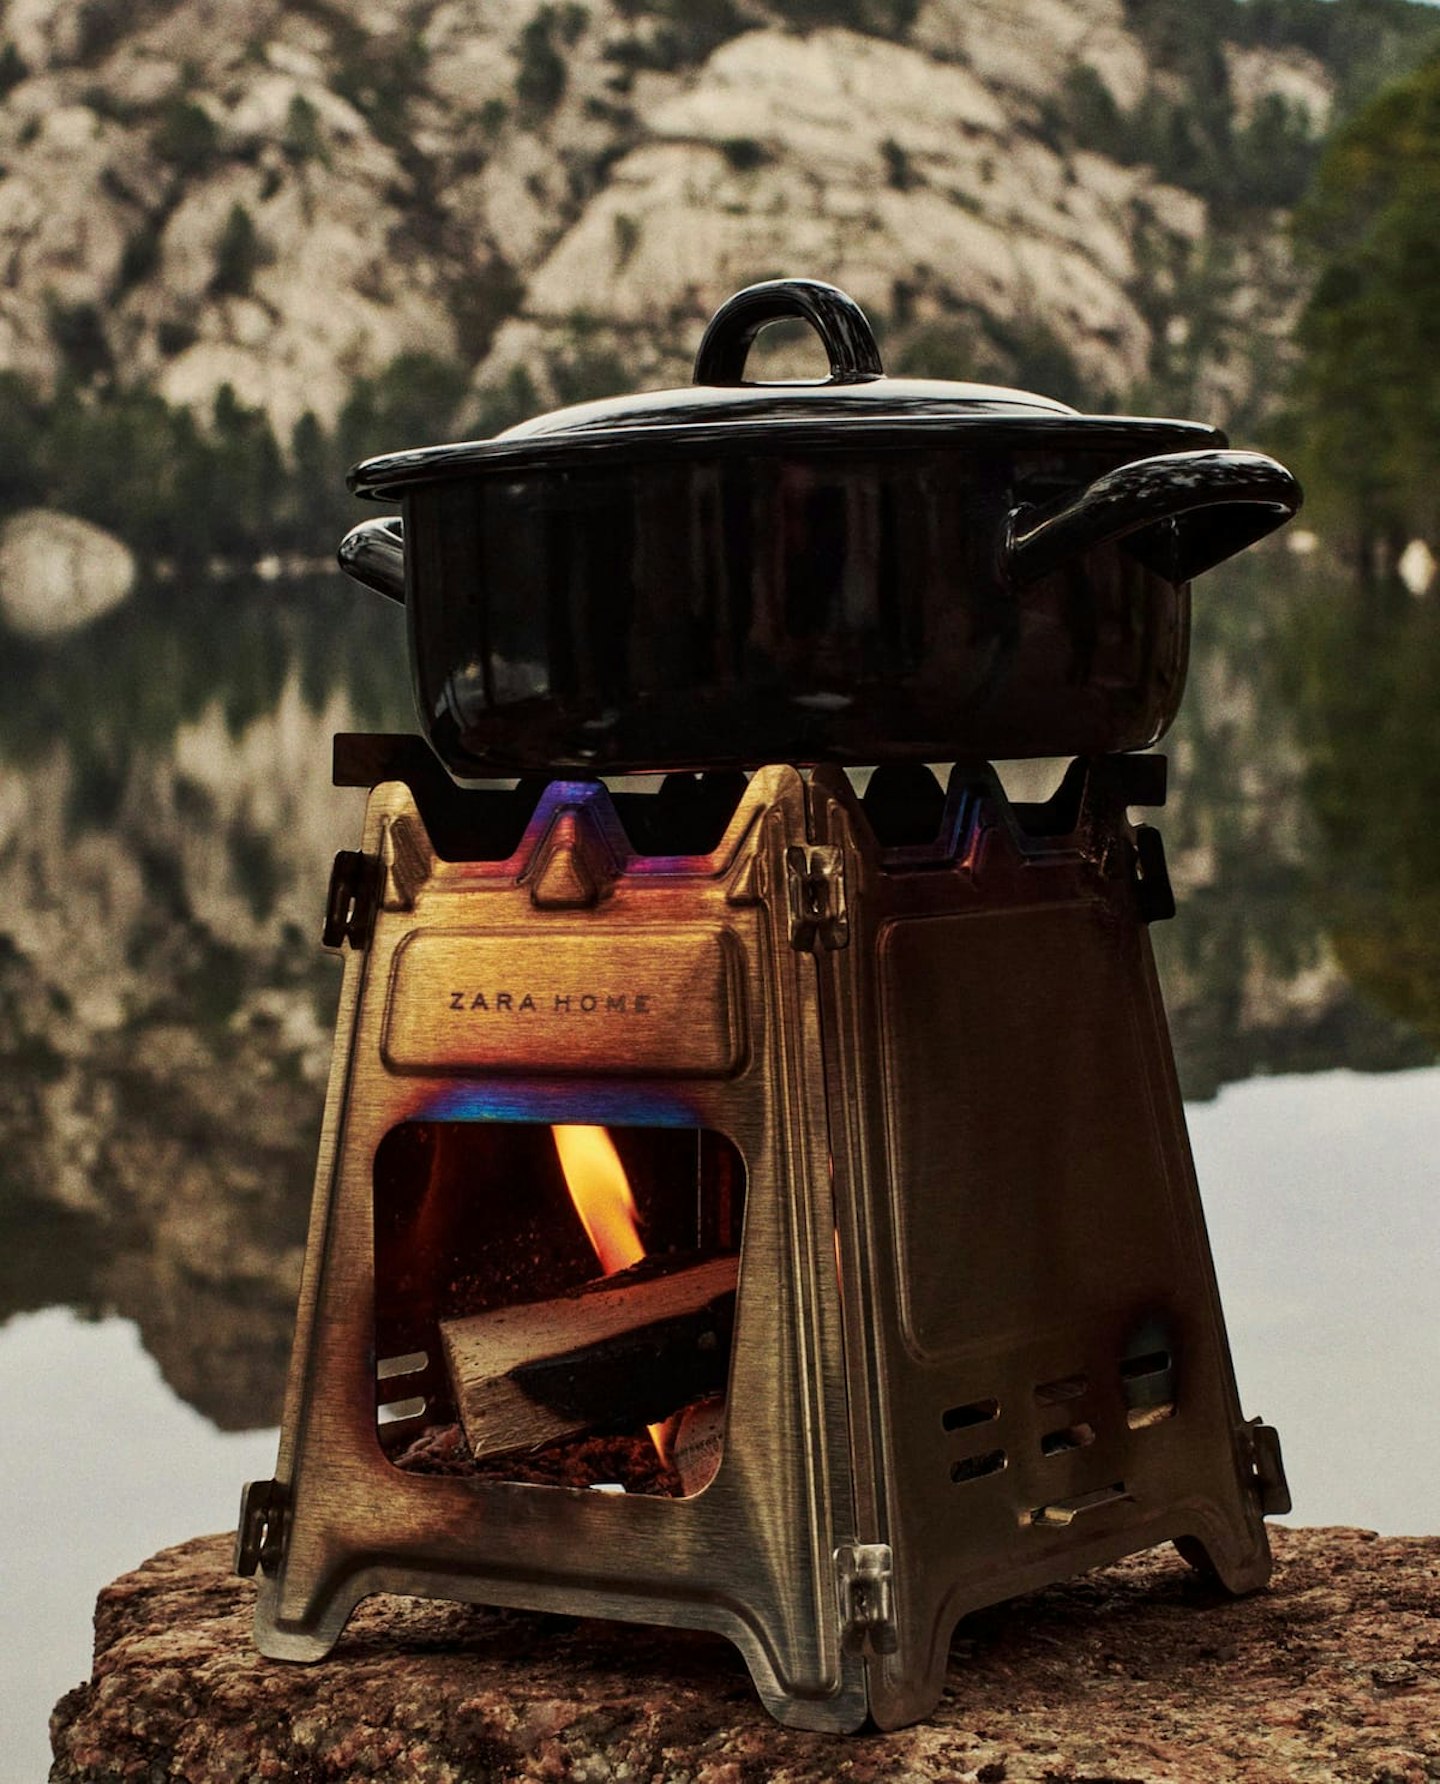 A camping stove from Zara Home